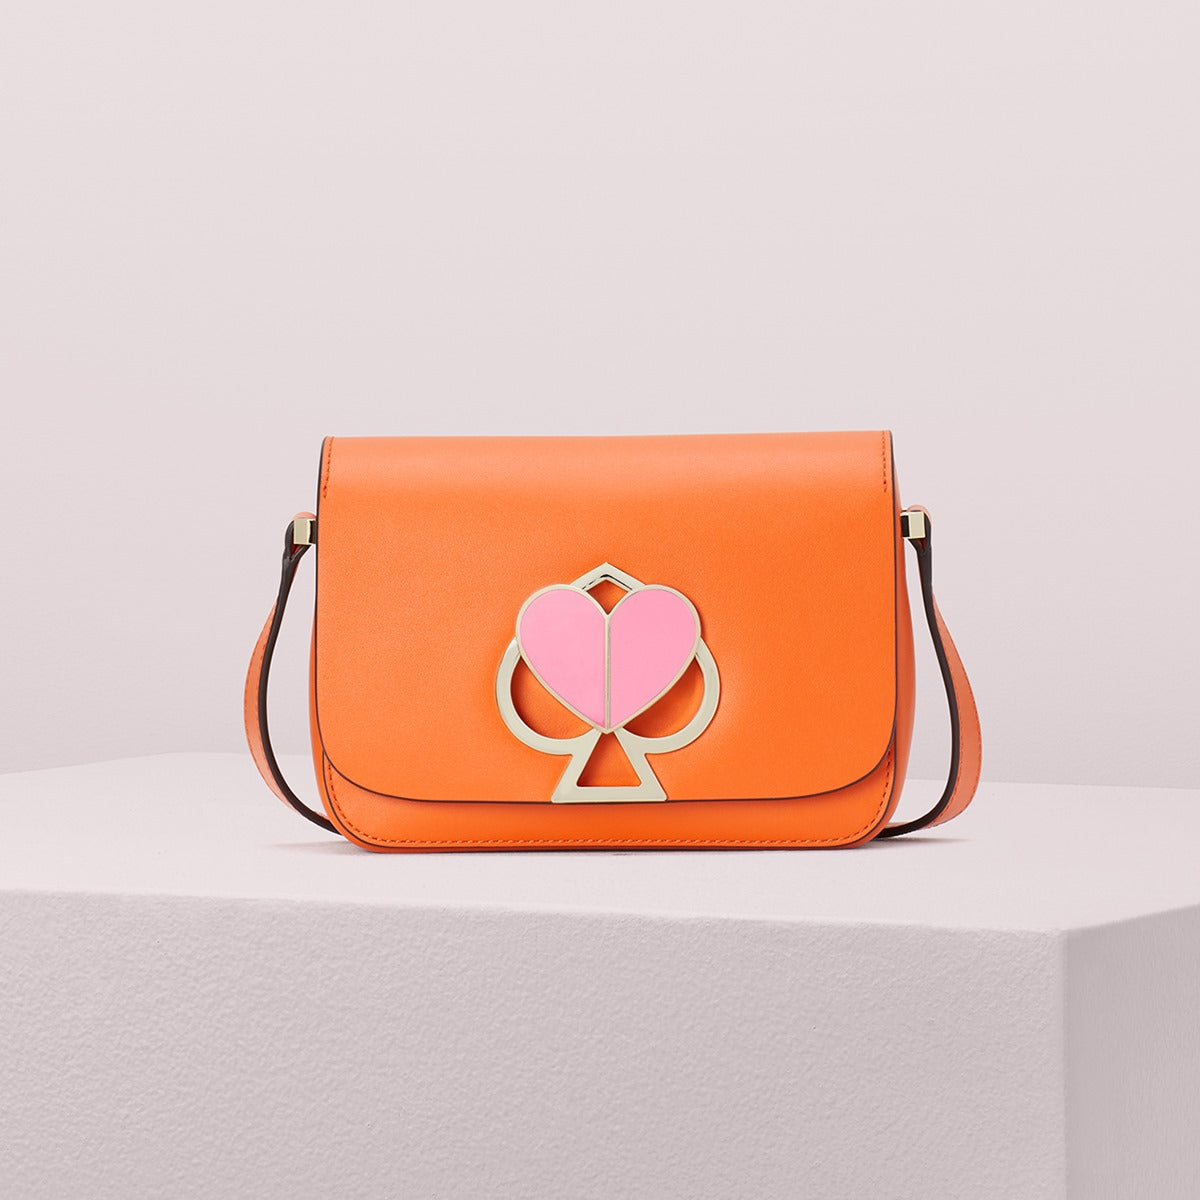 Kate Spade Nicola Twistlock Small Shoulder Bag Review (20) - With Wonder  and Whimsy